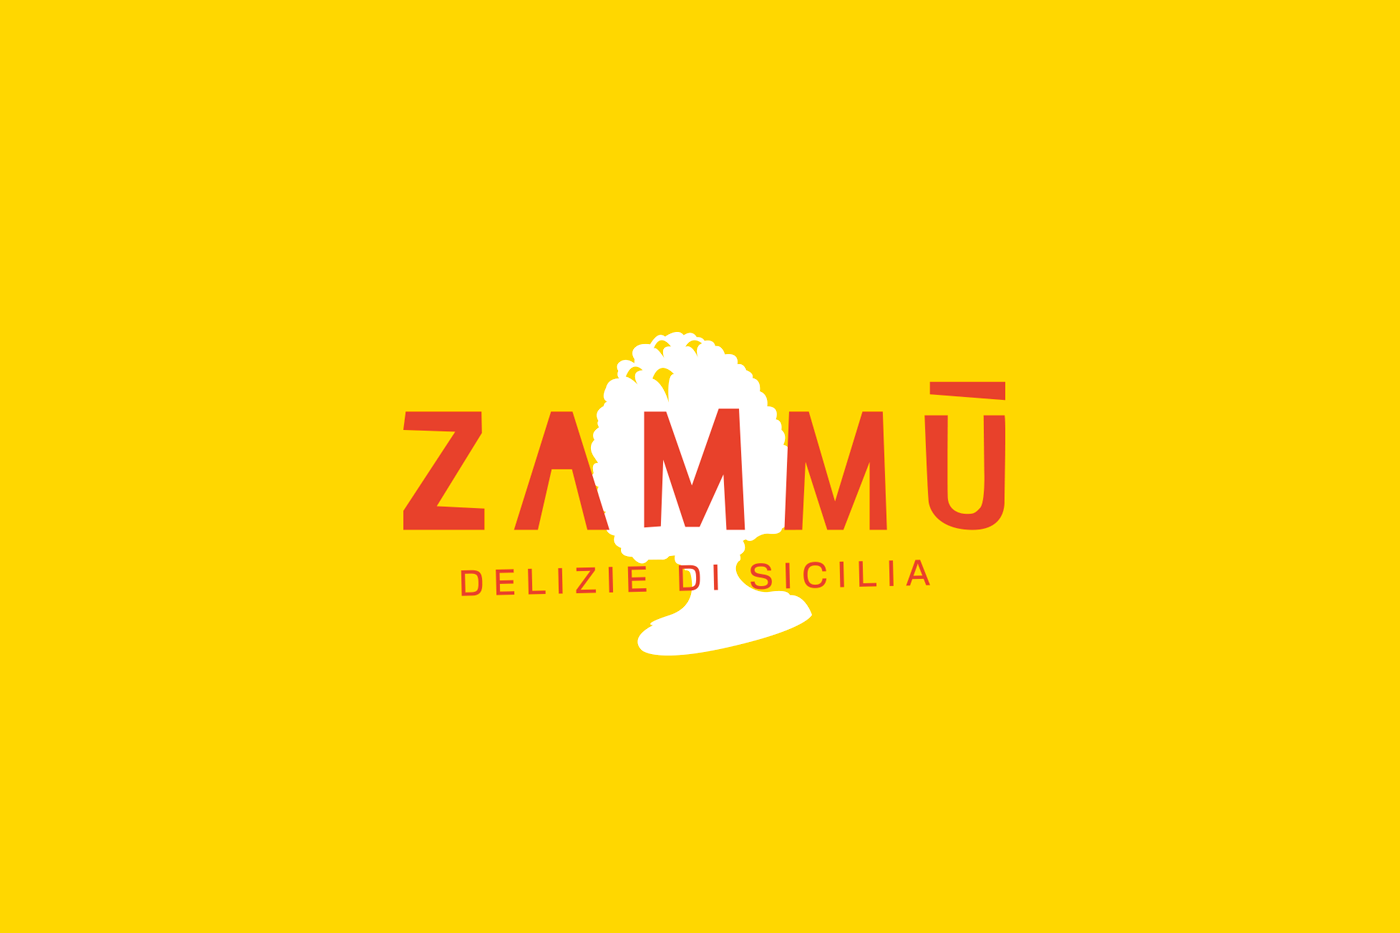 Food  food delivery Italy sicily deli restaurant colors illustrations red yellow